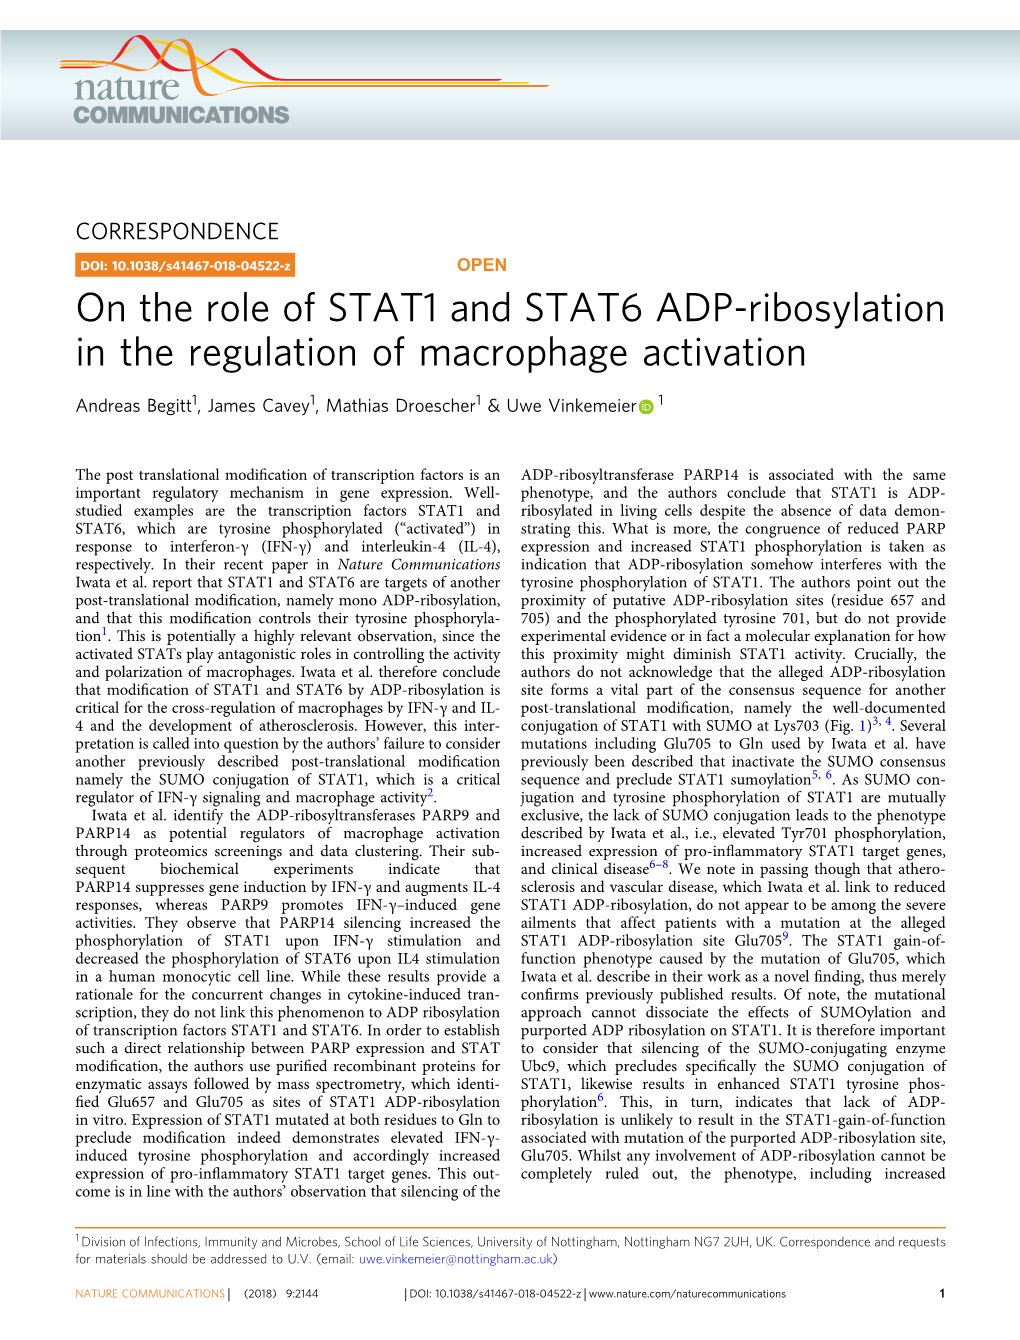 On the Role of STAT1 and STAT6 ADP-Ribosylation in the Regulation of Macrophage Activation